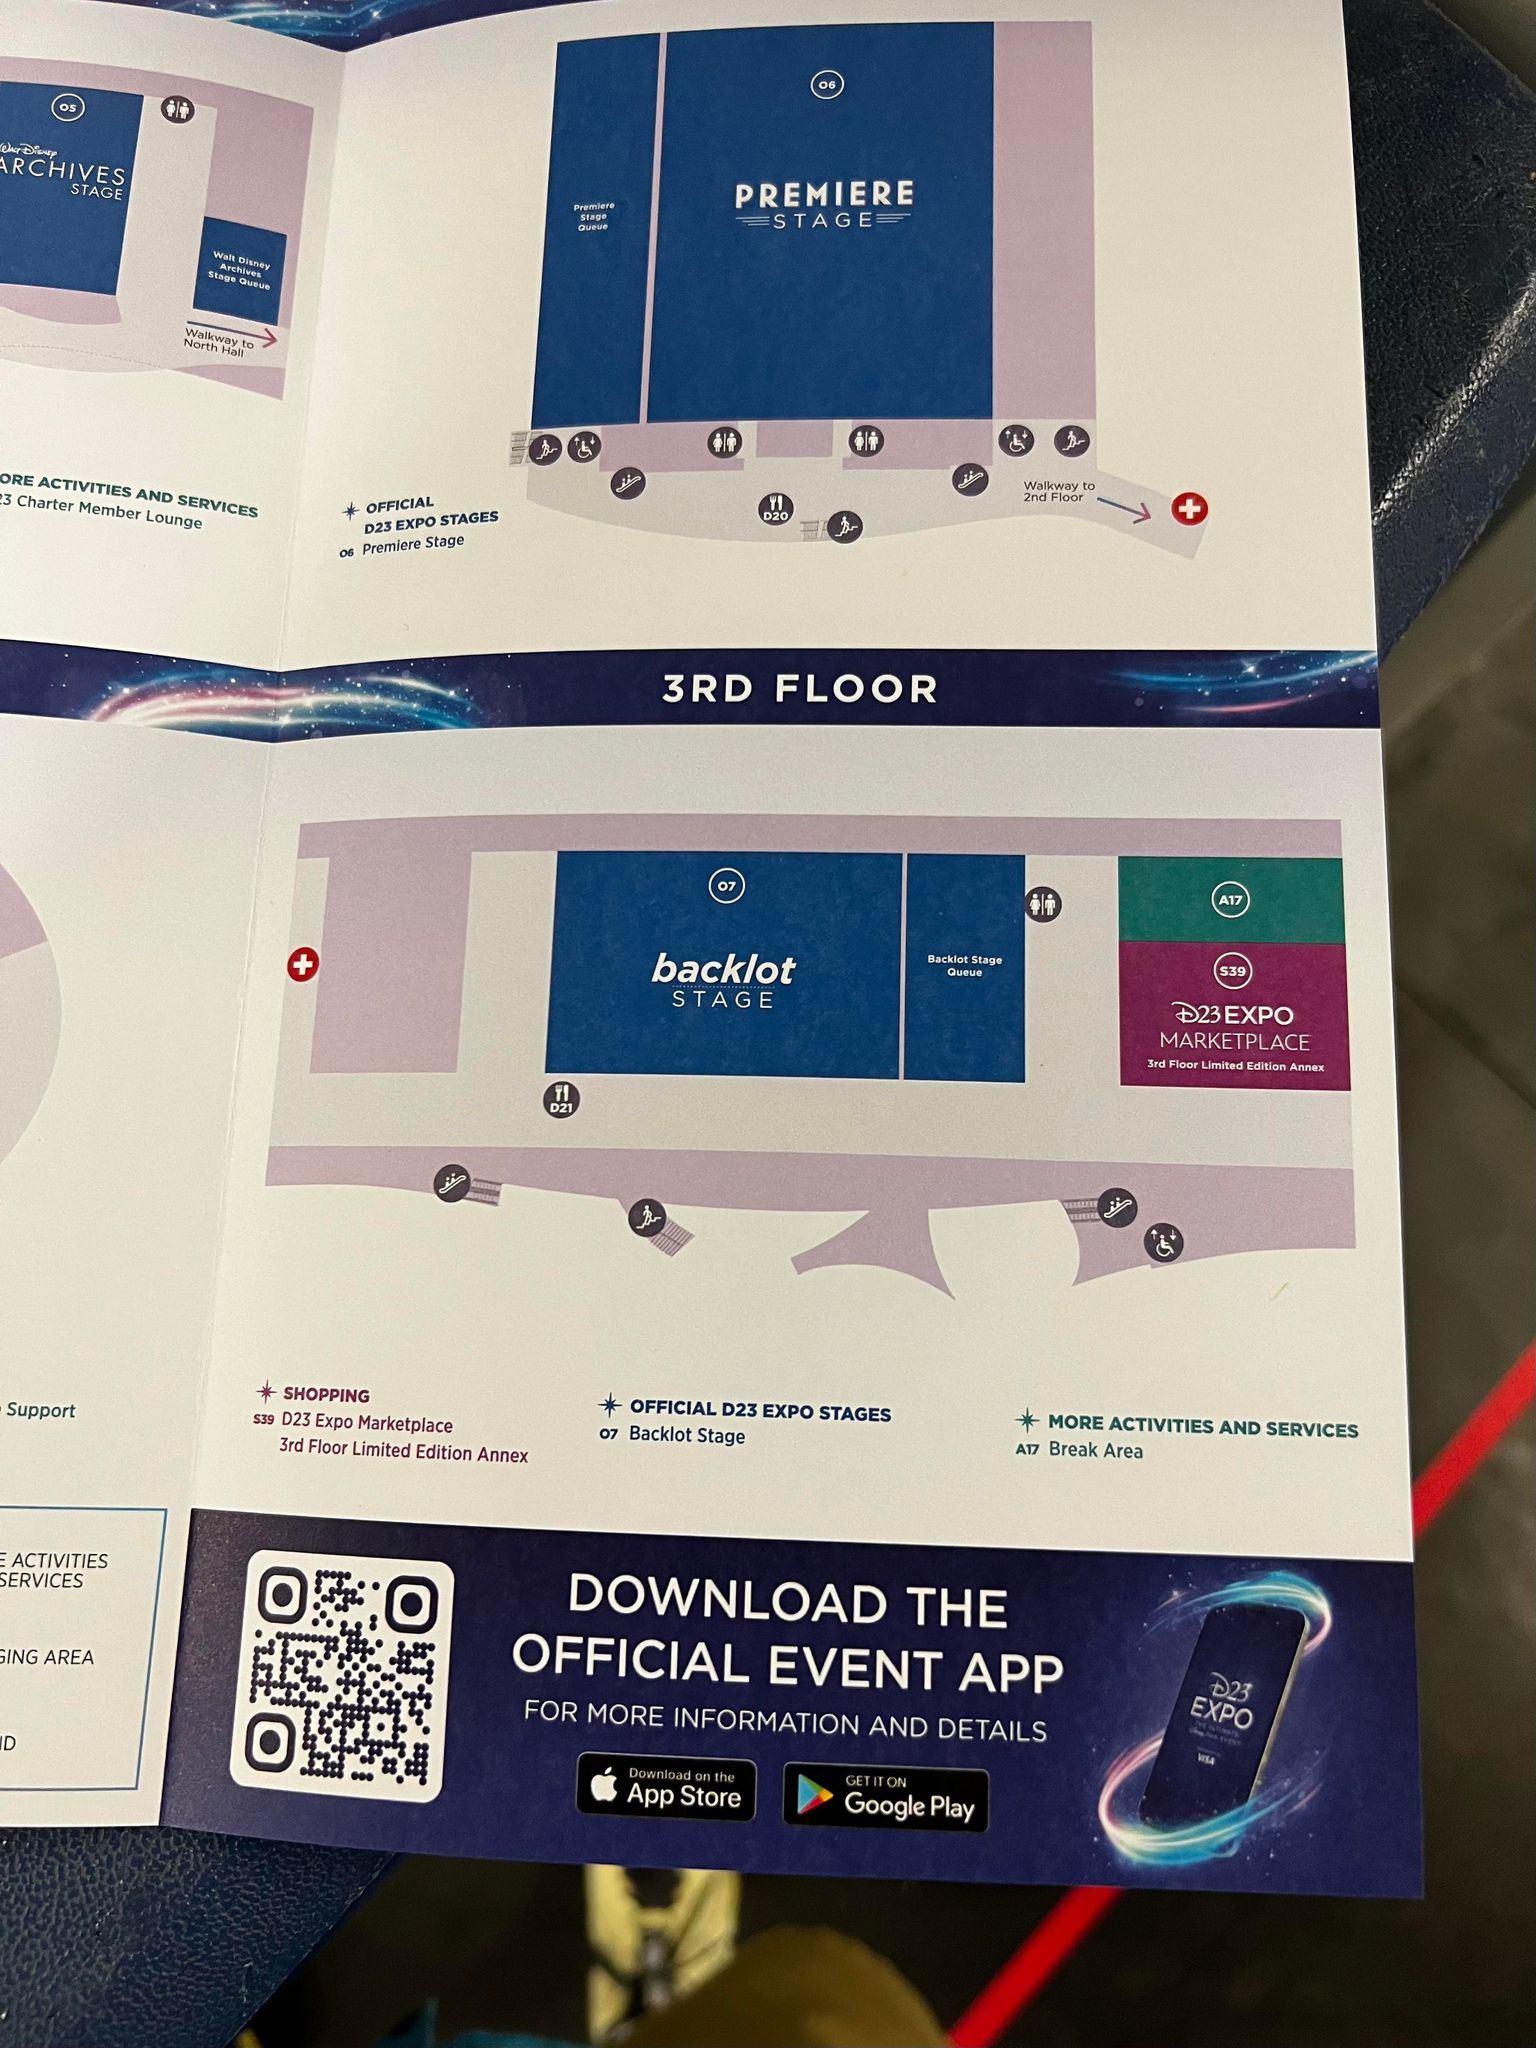 d23 expo map guidebook